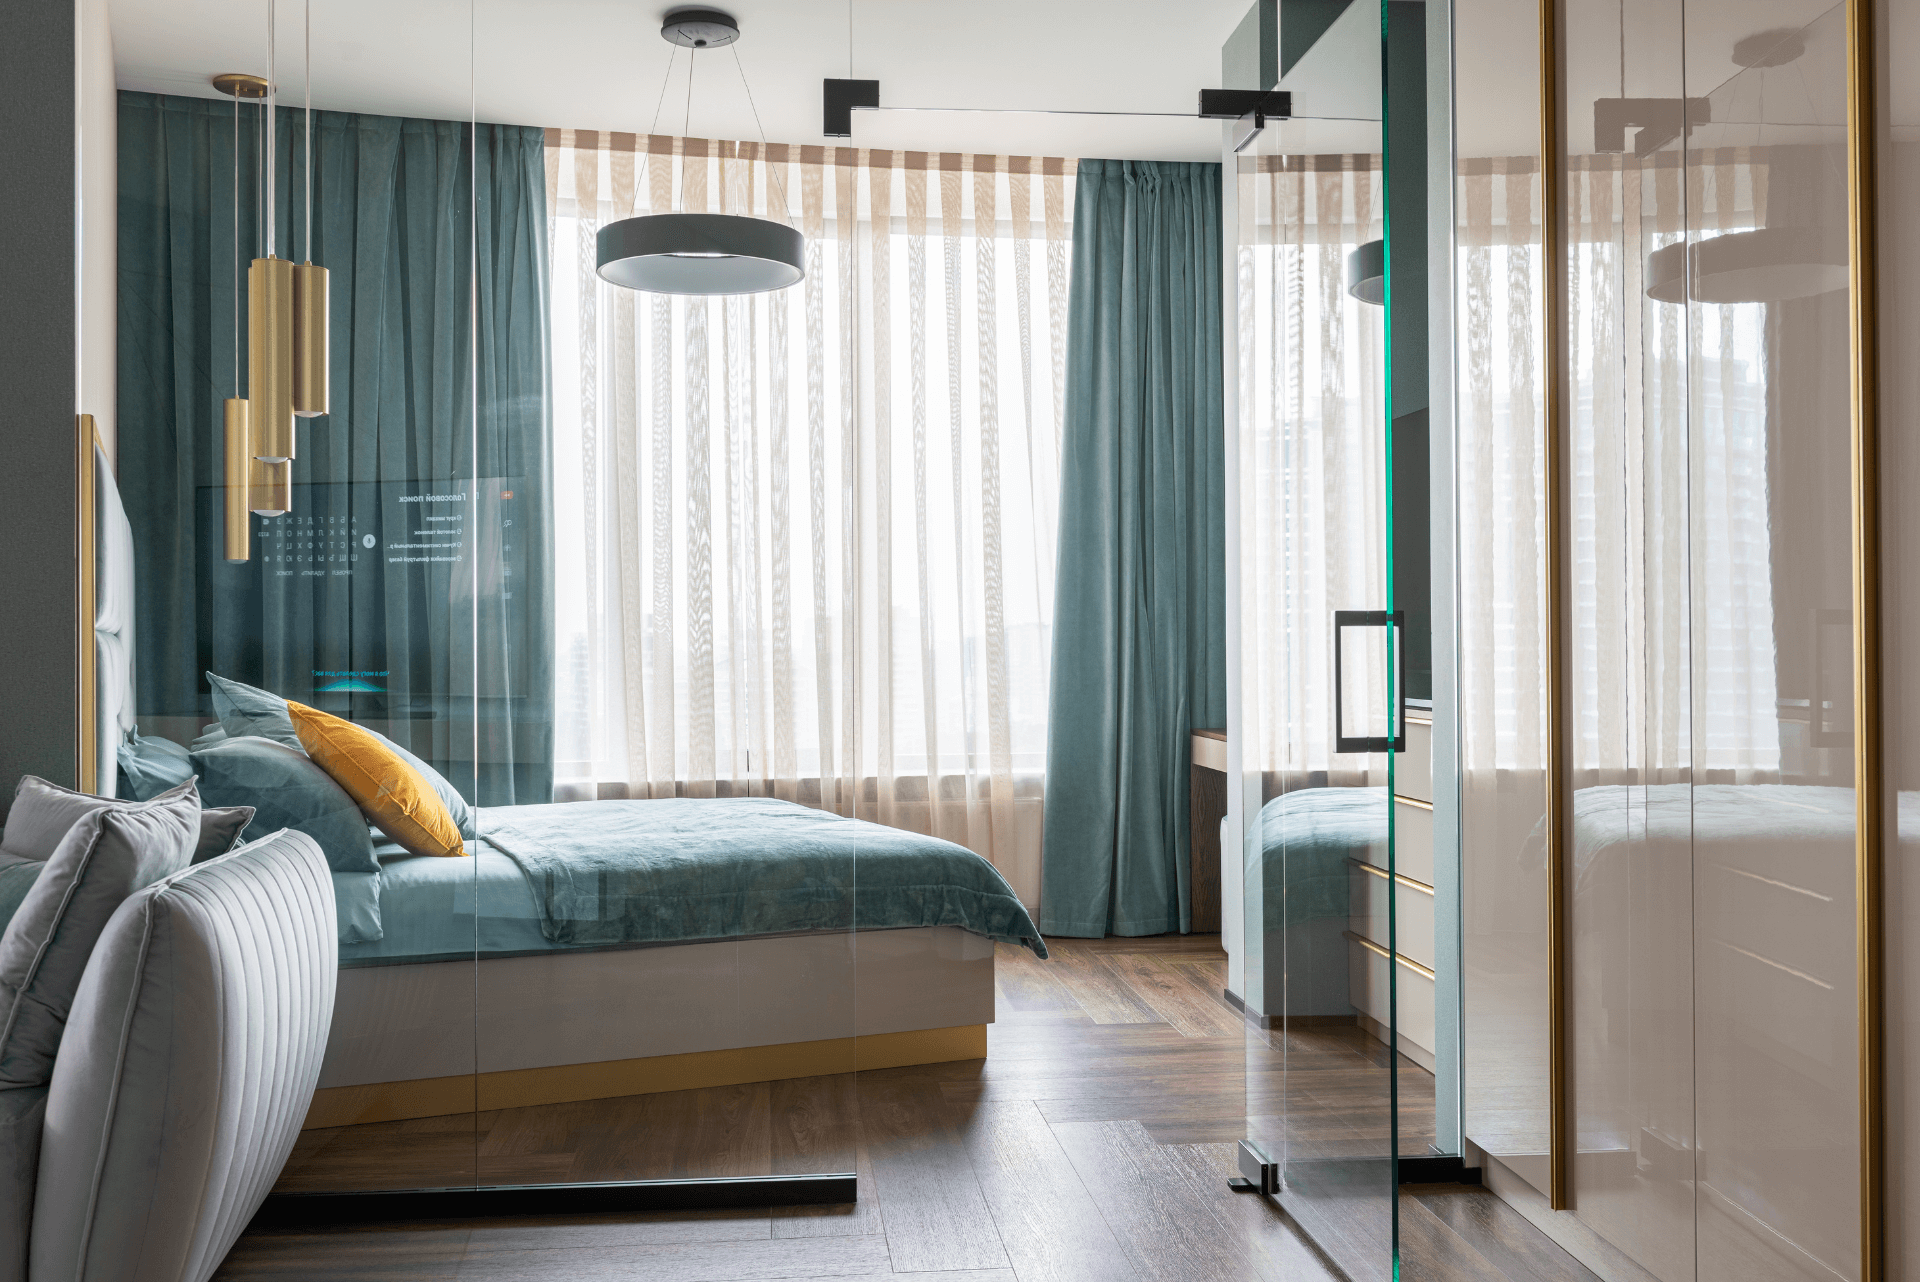 Day & Night Blockout Curtains Buying Guide